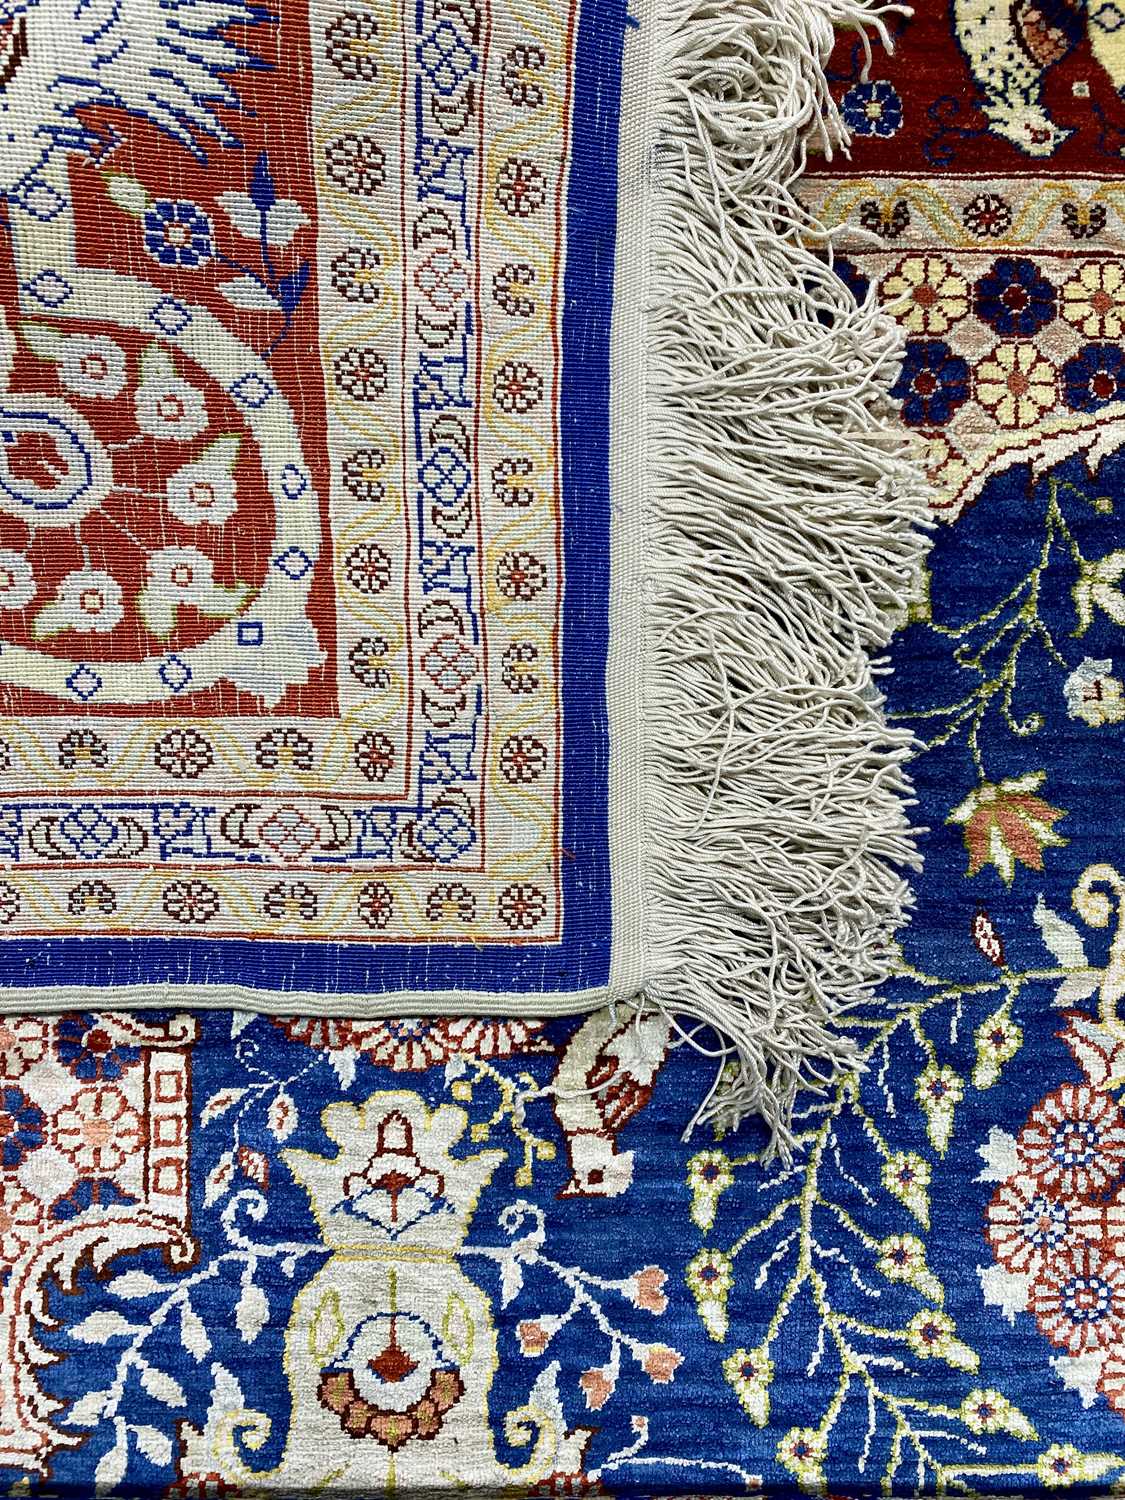 TURKISH HAND MADE SILK CARPET, blue, red and cream ground, centre field with oval medallion, birds - Image 3 of 3